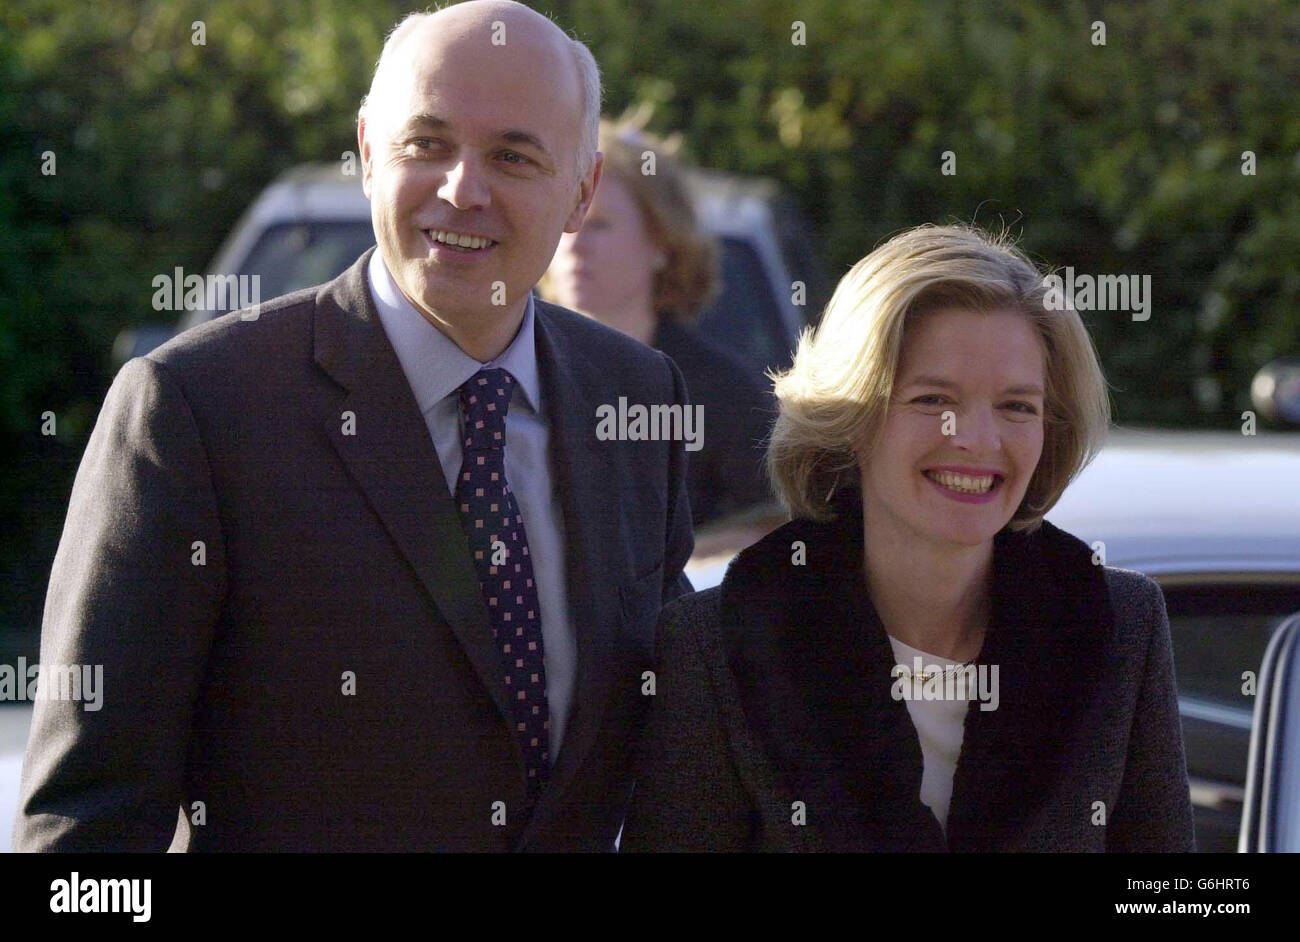 Conservative party leader, Ian Duncan Smith, arrives with his wife Betsy for a press conference in Loughborough. Duncan Smith stood defiant today as his policies on student tuition fees were drowned out by a barrage of questions over his leadership crisis - and insisted he would lead the party into power at the next election. 29/03/2004: Mr Iain Duncan Smith has been cleared Monday March 29, 2004, of wrongdoing over the 'Betsygate' row after the Committee on Standards and Privileges dismissed complaints that he improperly employed his wife as a secretary. Stock Photo